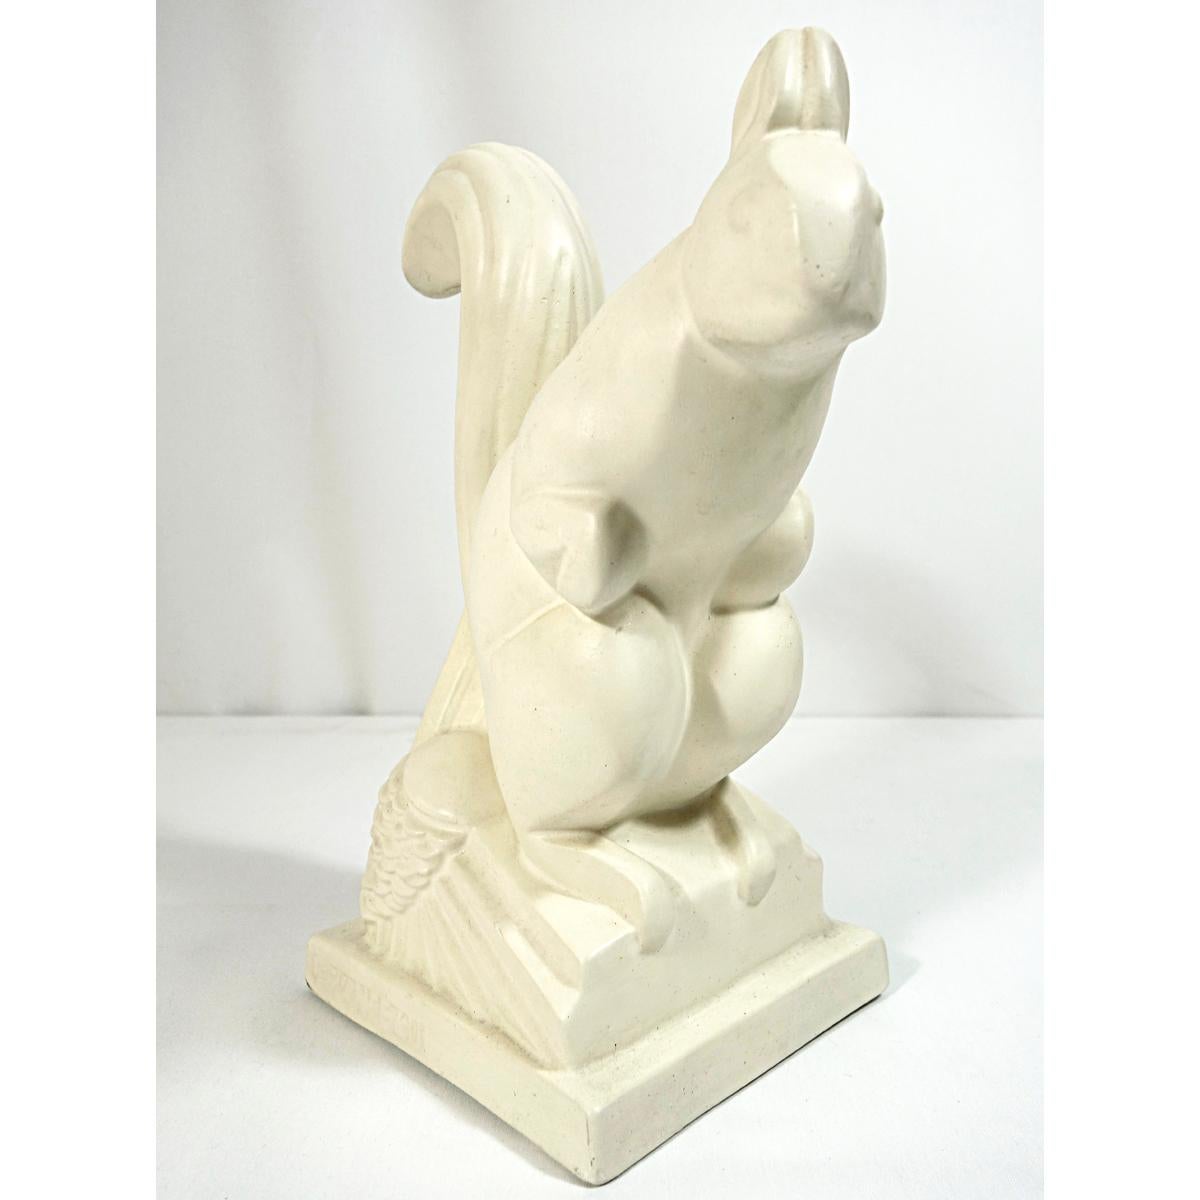 Charming Art Deco ceramic squirrel in cream by French artist Charles Lemanceau (1905-1980). A stylized depiction set on an integral architectural plinth with stylized pine cones.
Signed Lemanceau on plinth.
French, 1930s.